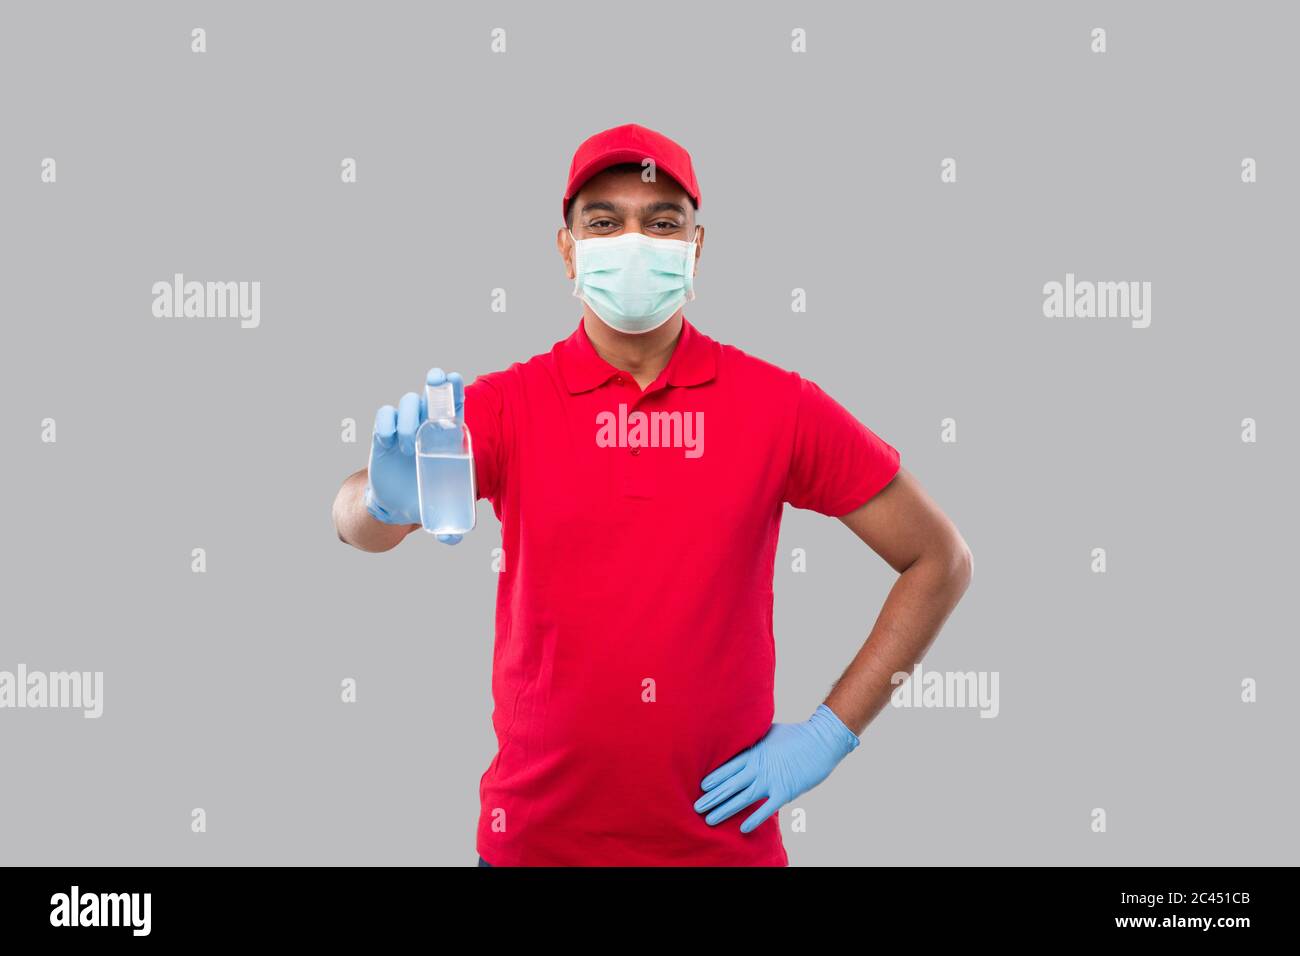 Delivery Man Showing Hands Sanitizer Wearing Medical Mask and Gloves Isolated. Indian Delivery Boy Holding Hand Antiseptic Stock Photo